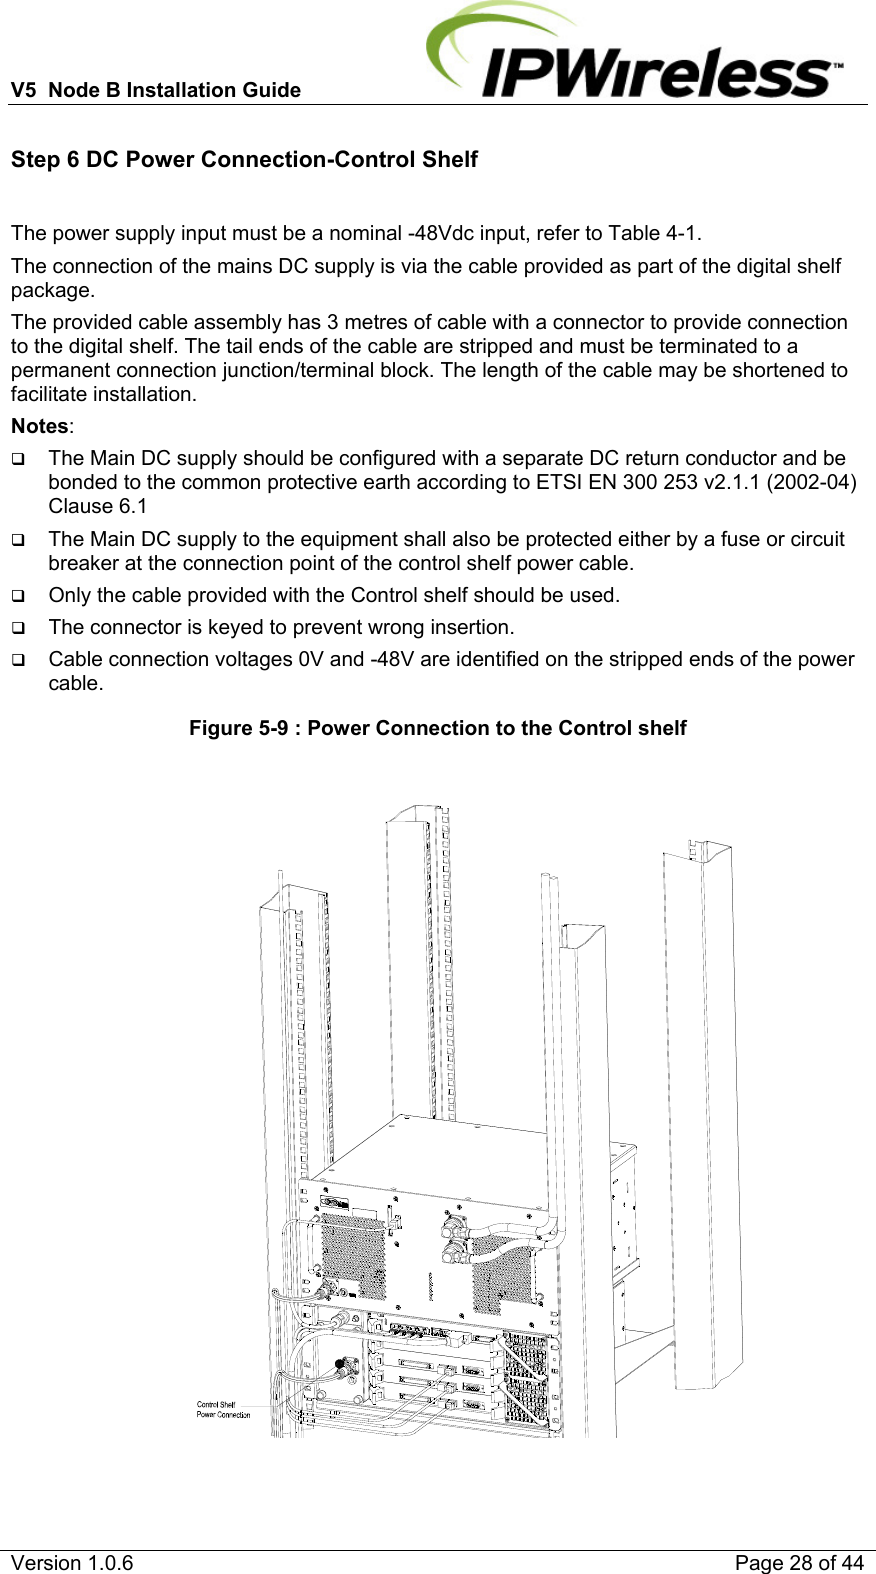 V5  Node B Installation Guide                           Version 1.0.6    Page 28 of 44 Step 6 DC Power Connection-Control Shelf  The power supply input must be a nominal -48Vdc input, refer to Table 4-1. The connection of the mains DC supply is via the cable provided as part of the digital shelf package. The provided cable assembly has 3 metres of cable with a connector to provide connection to the digital shelf. The tail ends of the cable are stripped and must be terminated to a permanent connection junction/terminal block. The length of the cable may be shortened to facilitate installation. Notes:   The Main DC supply should be configured with a separate DC return conductor and be bonded to the common protective earth according to ETSI EN 300 253 v2.1.1 (2002-04) Clause 6.1  The Main DC supply to the equipment shall also be protected either by a fuse or circuit breaker at the connection point of the control shelf power cable.  Only the cable provided with the Control shelf should be used.  The connector is keyed to prevent wrong insertion.  Cable connection voltages 0V and -48V are identified on the stripped ends of the power cable. Figure 5-9 : Power Connection to the Control shelf    